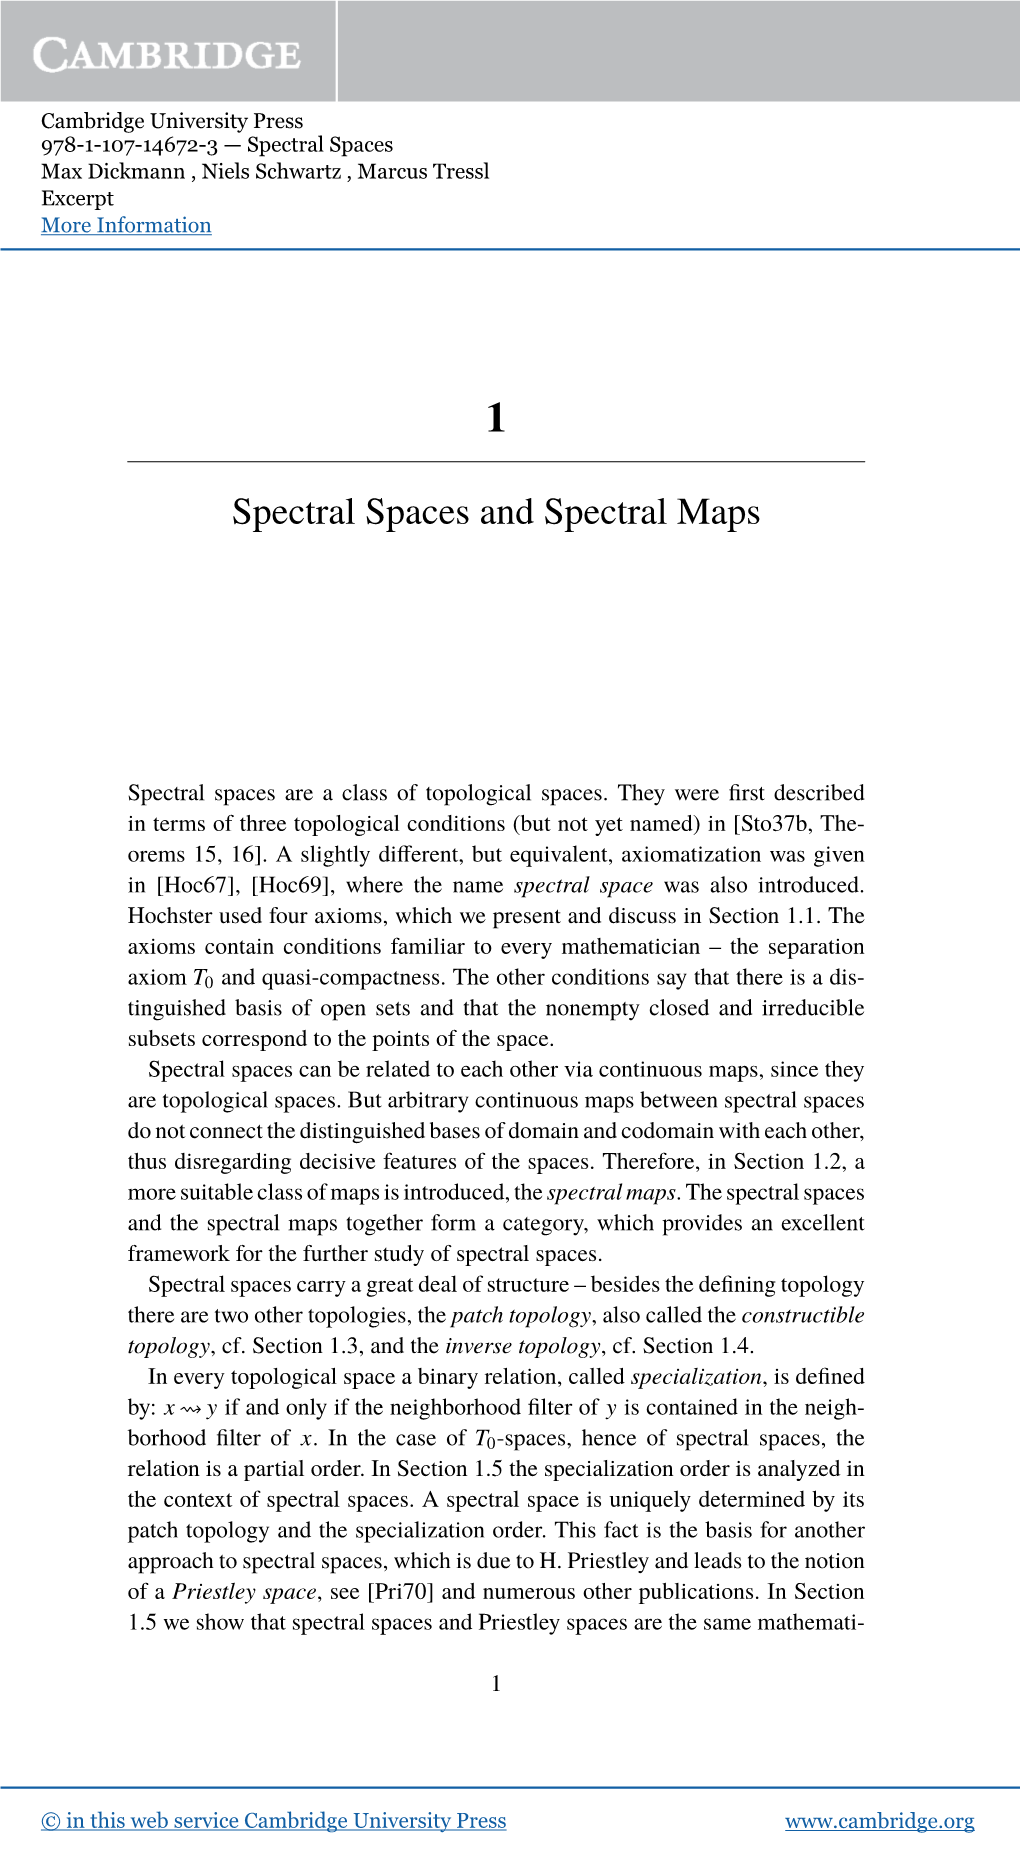 Spectral Spaces and Spectral Maps